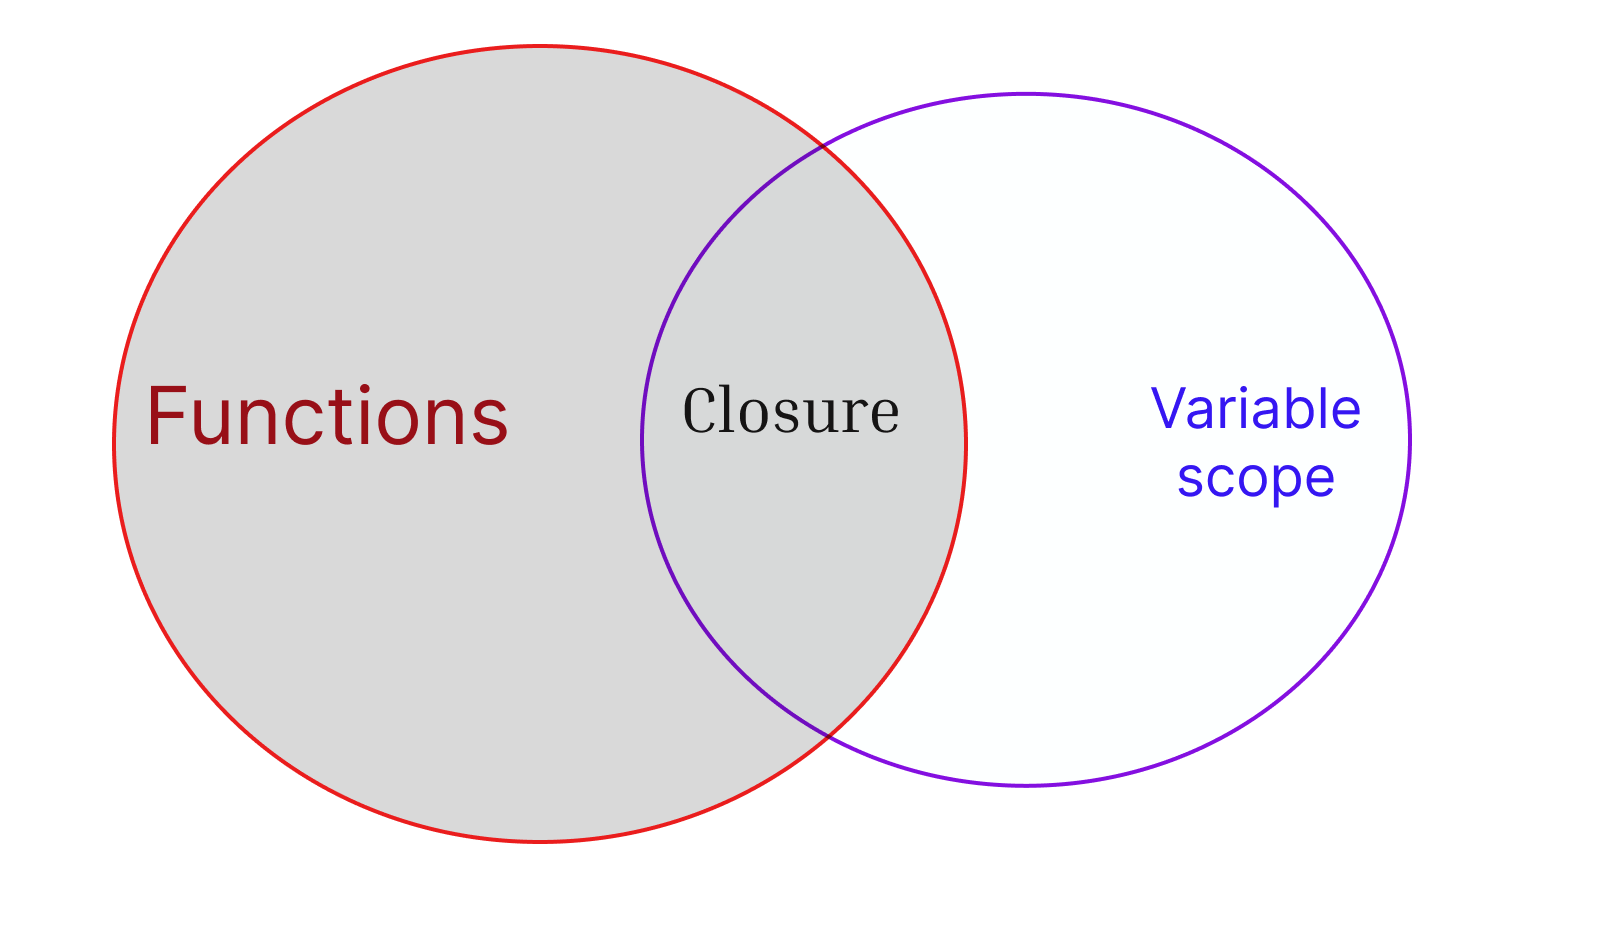 What is Closure?